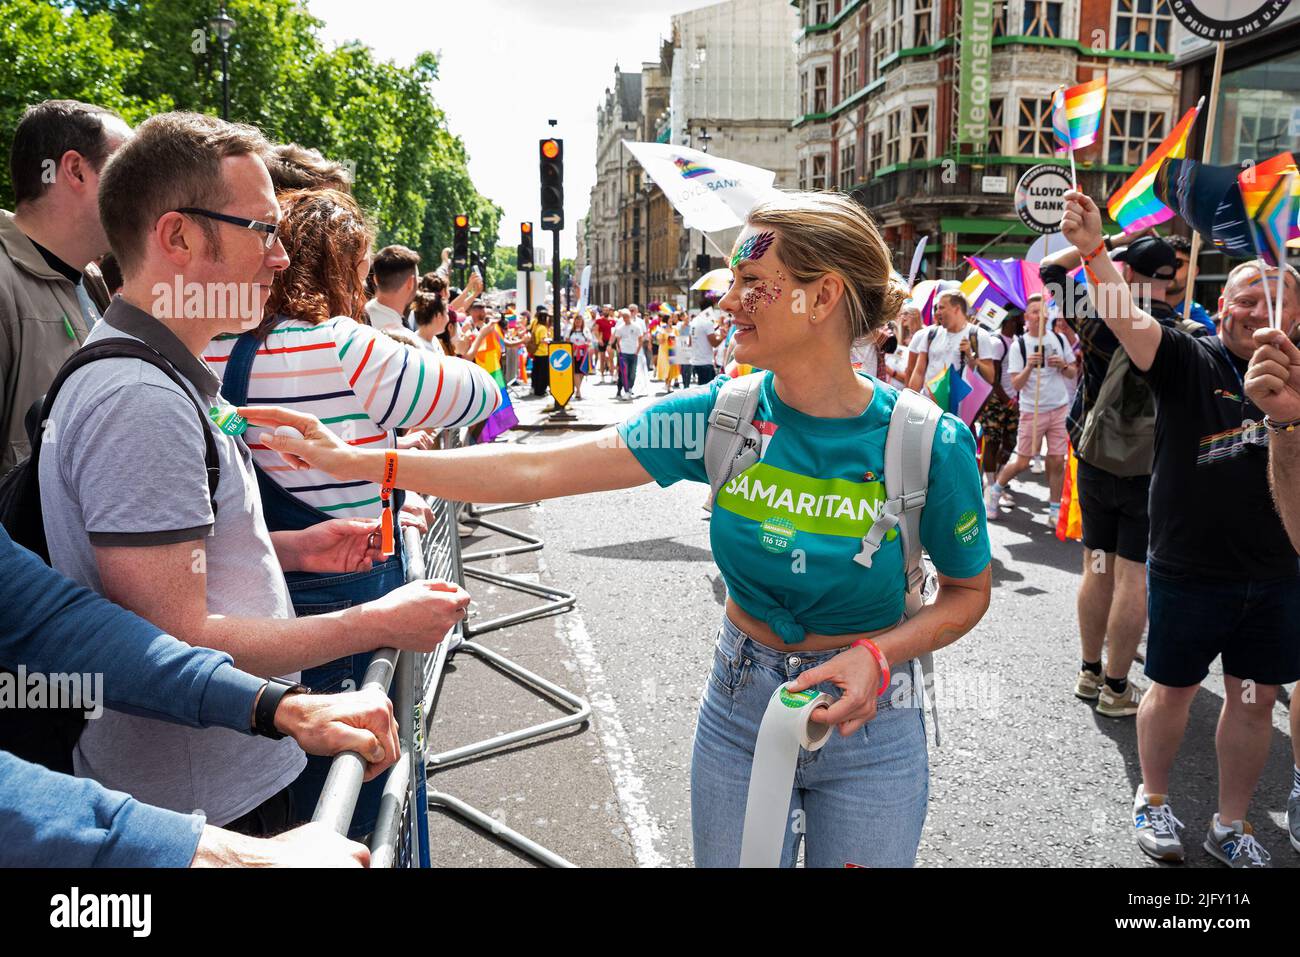 Piccadilly, London, UK. 2nd July 2022. London Pride March 2022. Celebrating 50 Years of Pride in the UK and following the same central London route taken in 1972. Samaritans Pride Marcher placing sticker on man behind barrier. Credit: Stephen Bell/Alamy Stock Photo